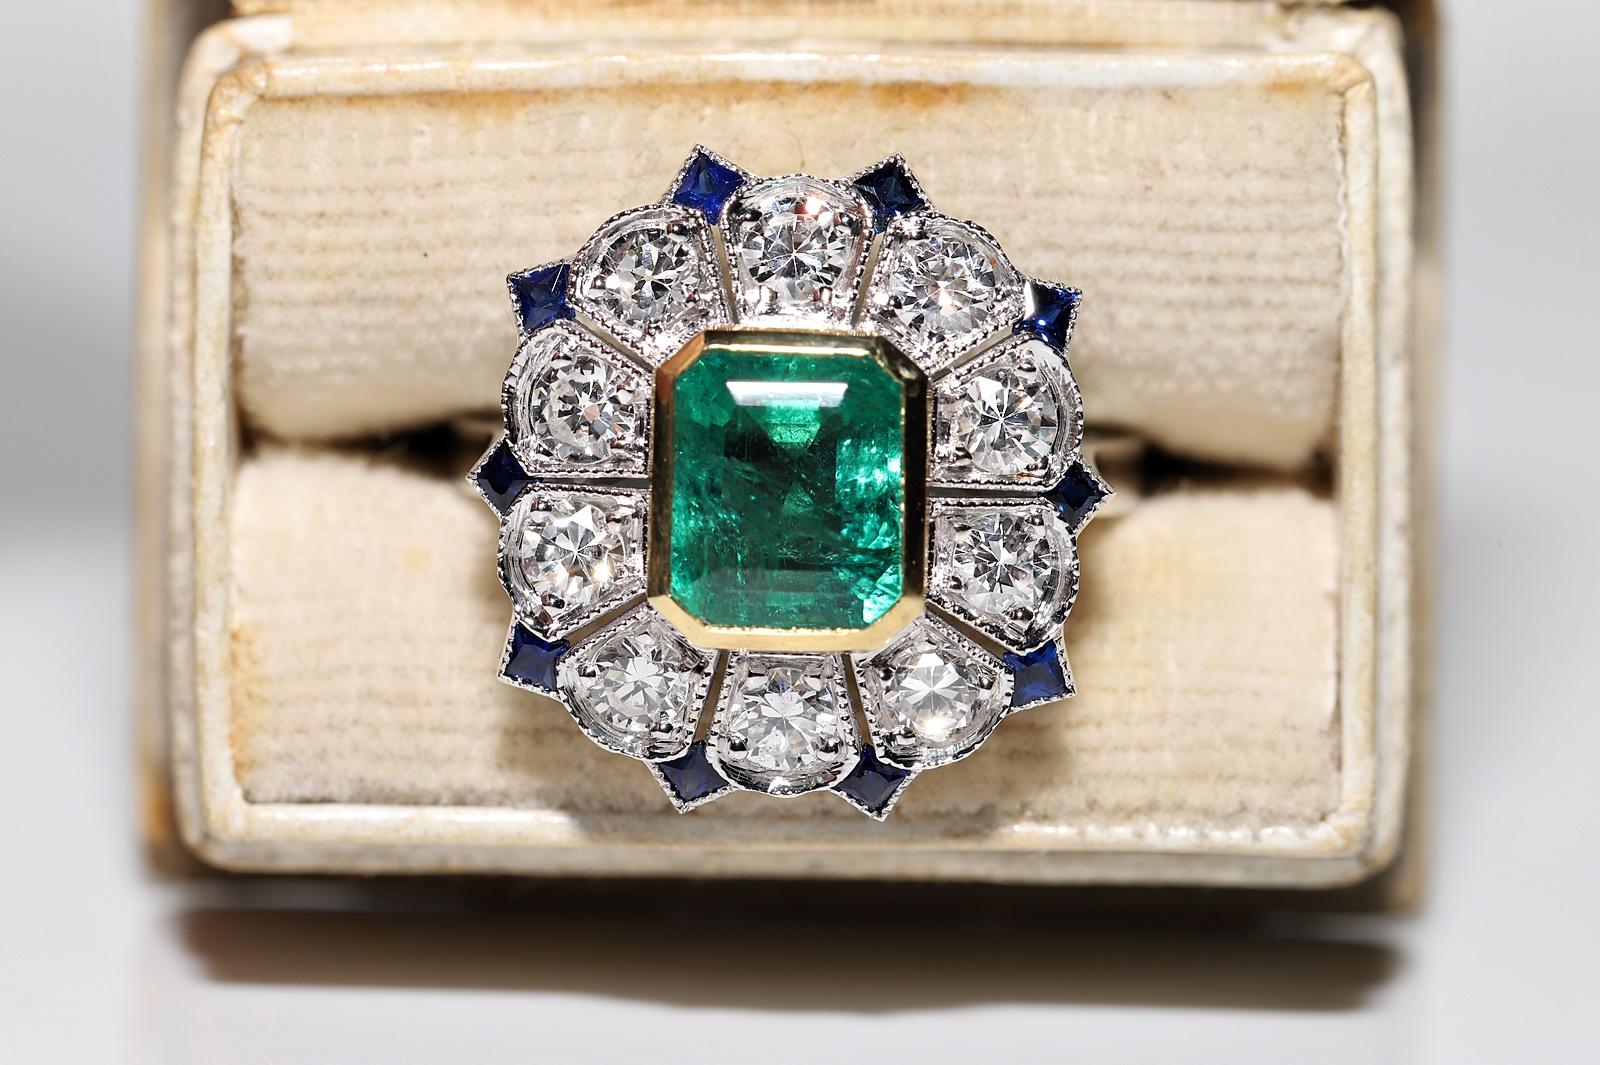 In very good condition.
Total weight is 7.2 grams.
Totally is diamond 1.07 ct.
The diamond is has F-G-H color and vvs-vs-s1 clarity.
Totally is emerald 2.41 ct.
Totally is sapphire 0.40 ct.
Ring size is US 6.5  (We offer free resizing)
We can make